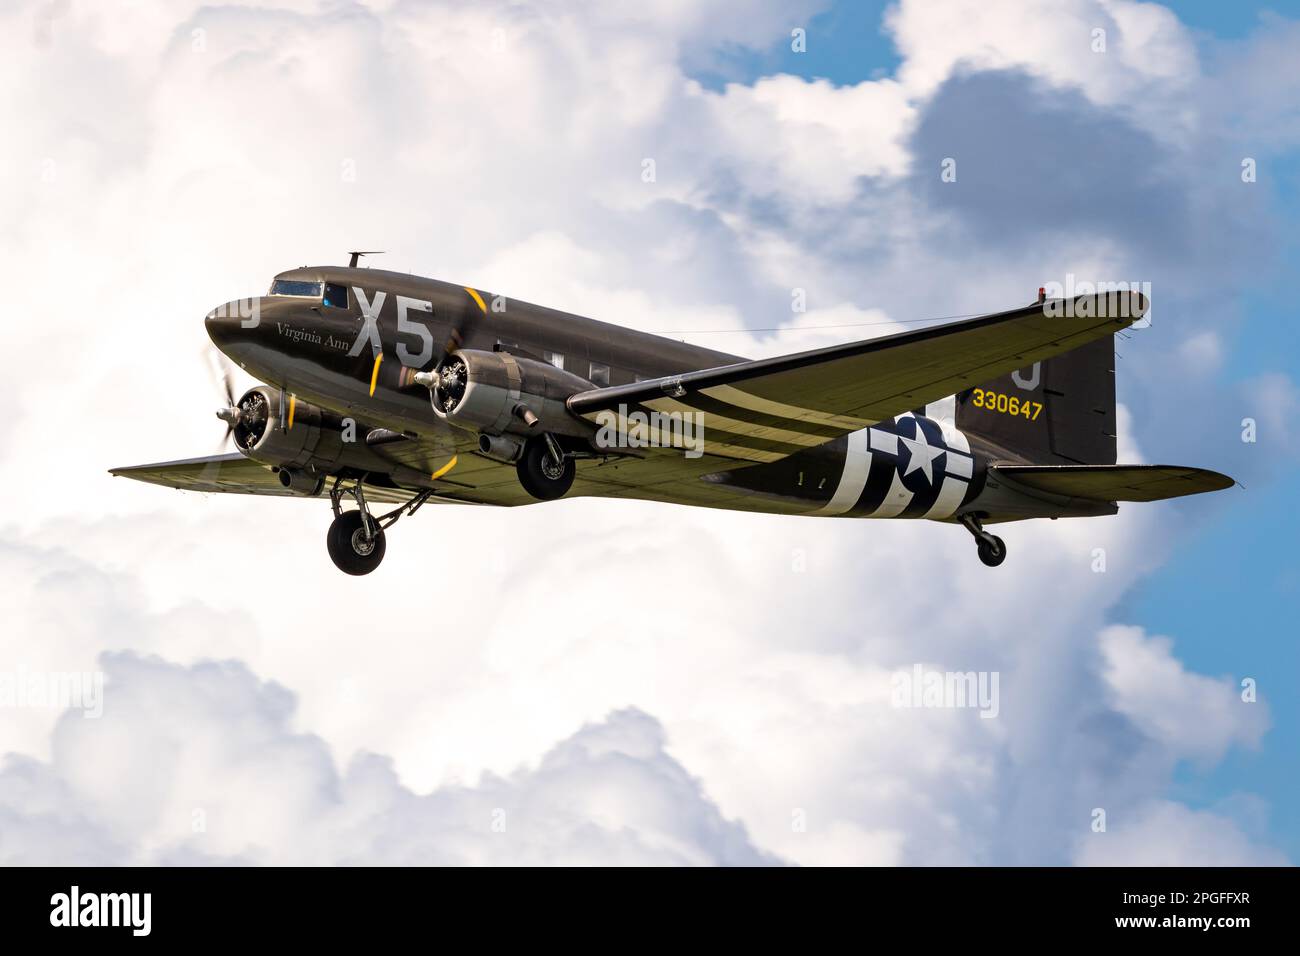 Vintage Douglas C-47 Dakota military transport plane in US Army Air Force livery in flight during D-Day 75 memorial flights over Germany. Jagel, Germa Stock Photo